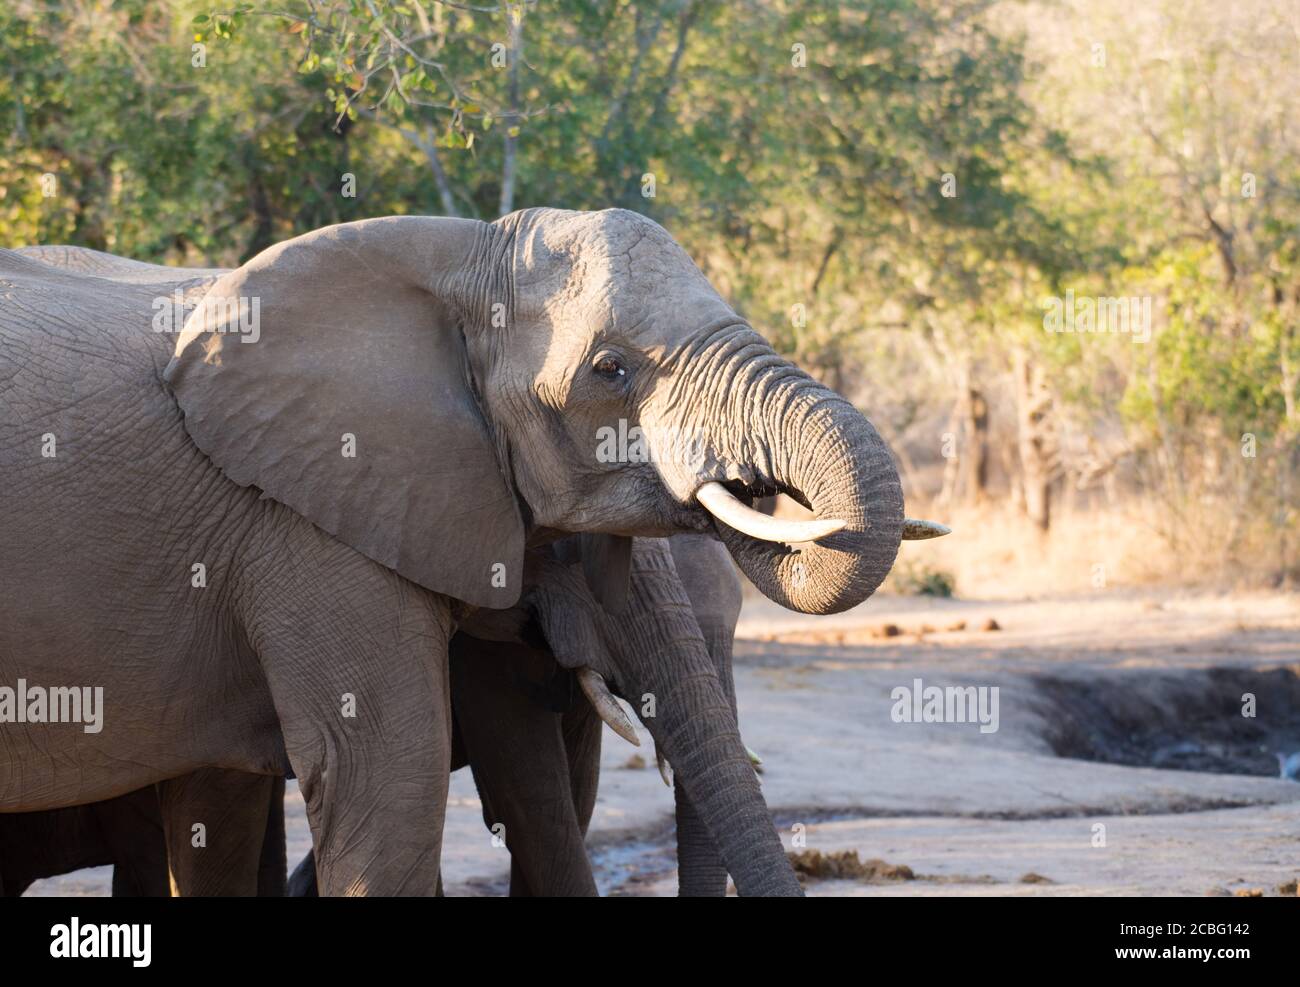 Elephant group at waterhole making turns to stand and drink water Stock Photo